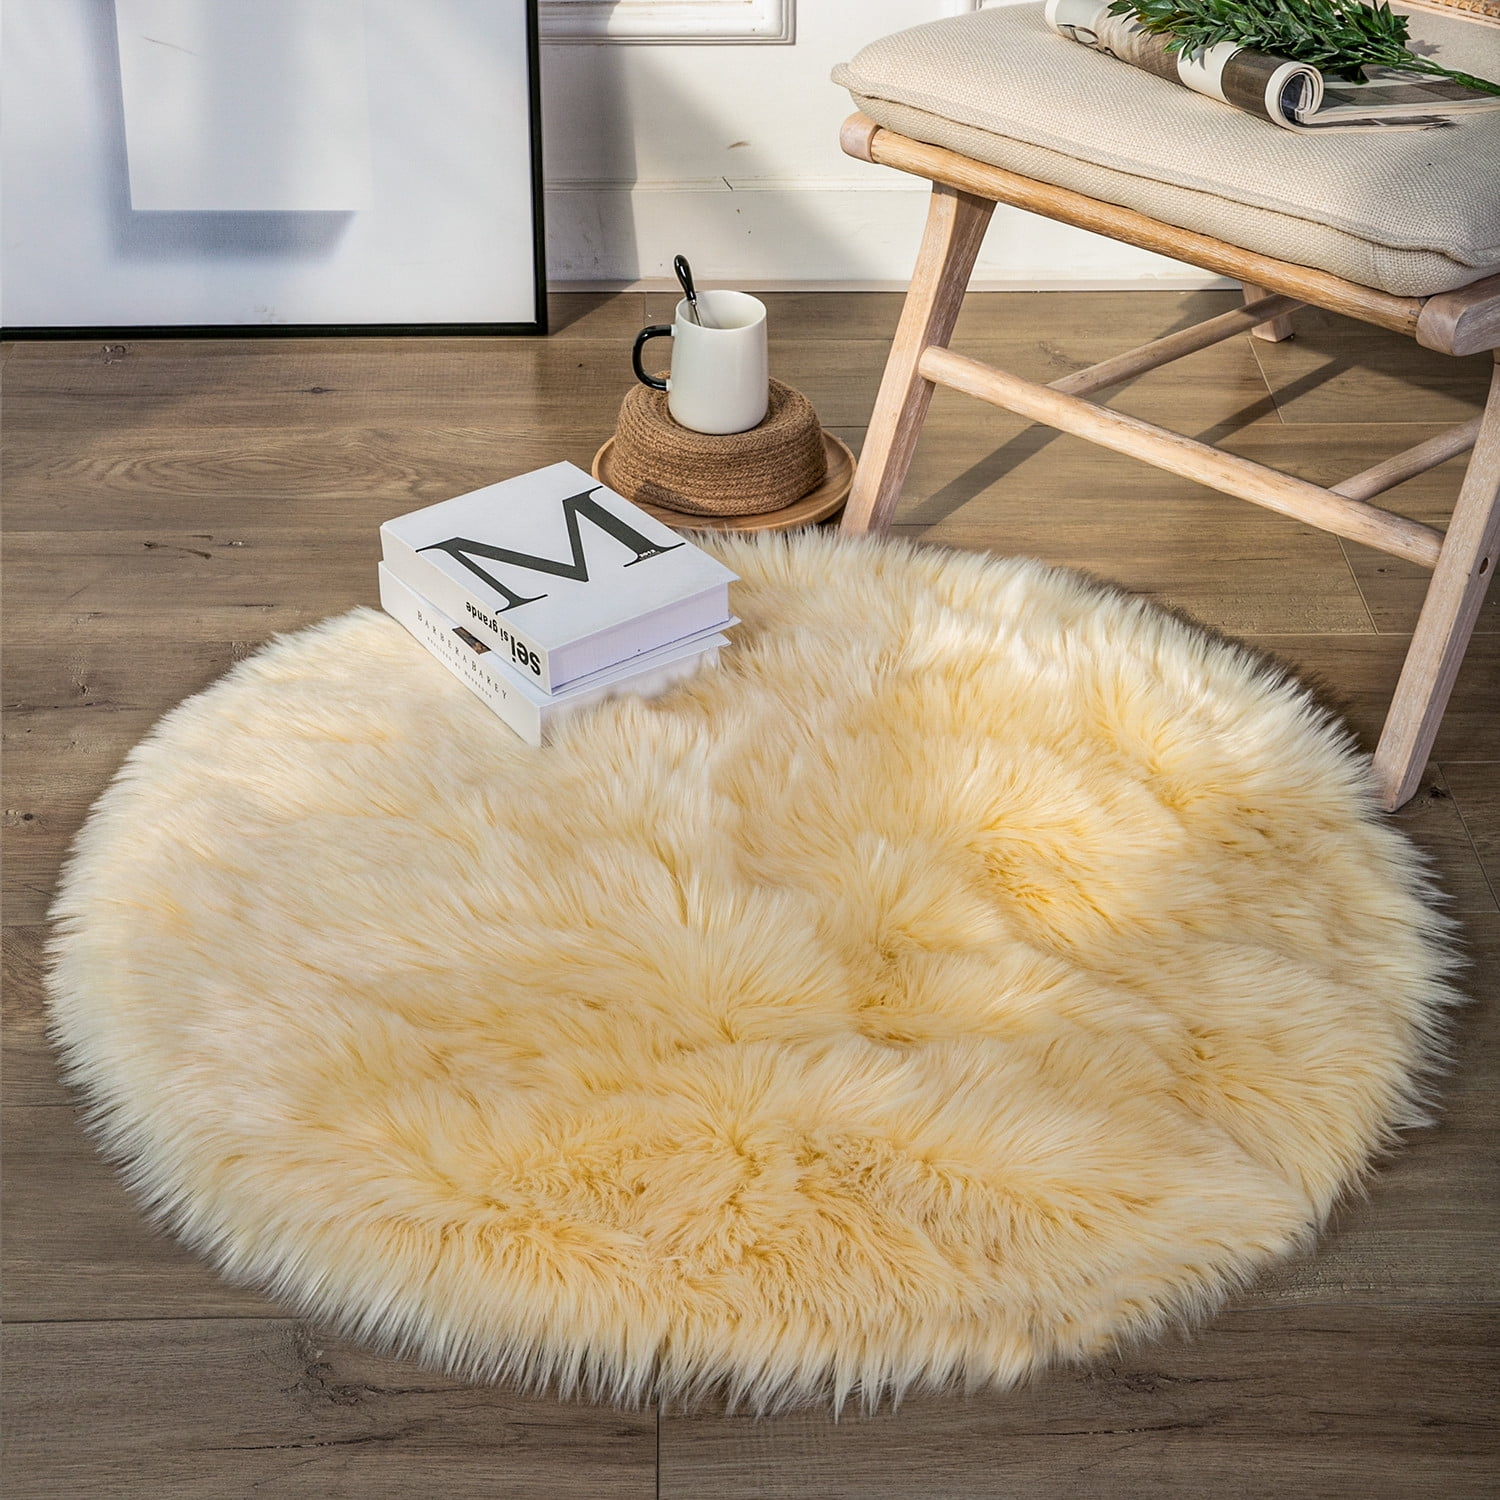 Phantoscope Deluxe Soft Faux Sheepskin, Pale Yellow Rug